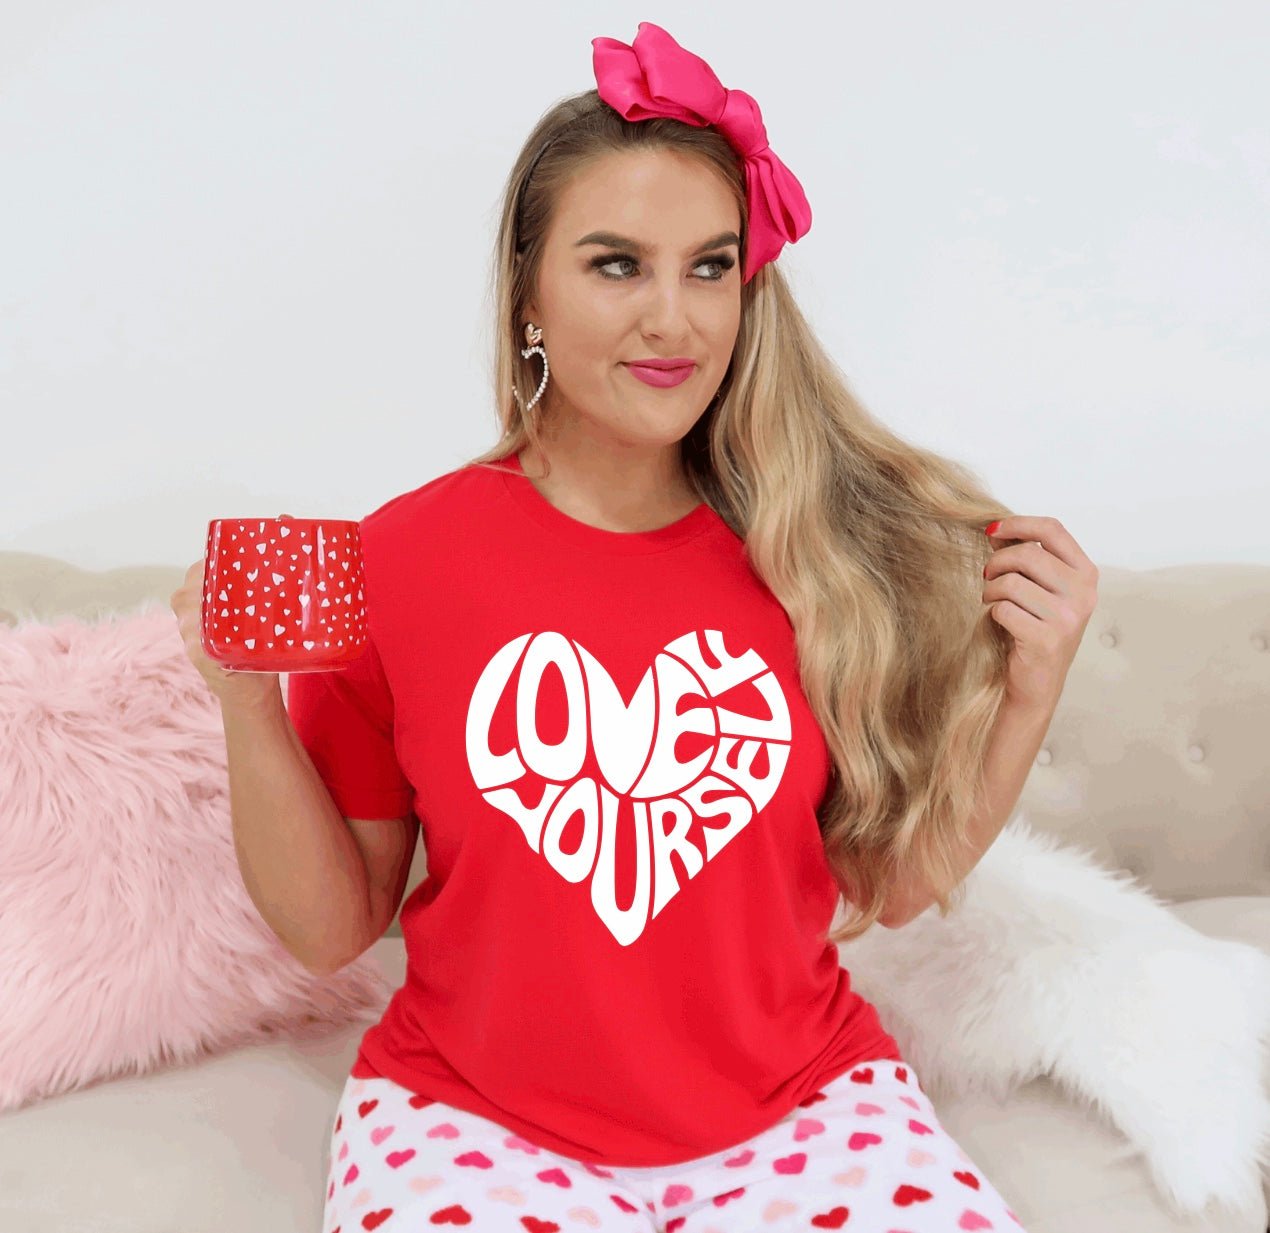 Love yourself Valentines Day unisex t-shirt for women in red